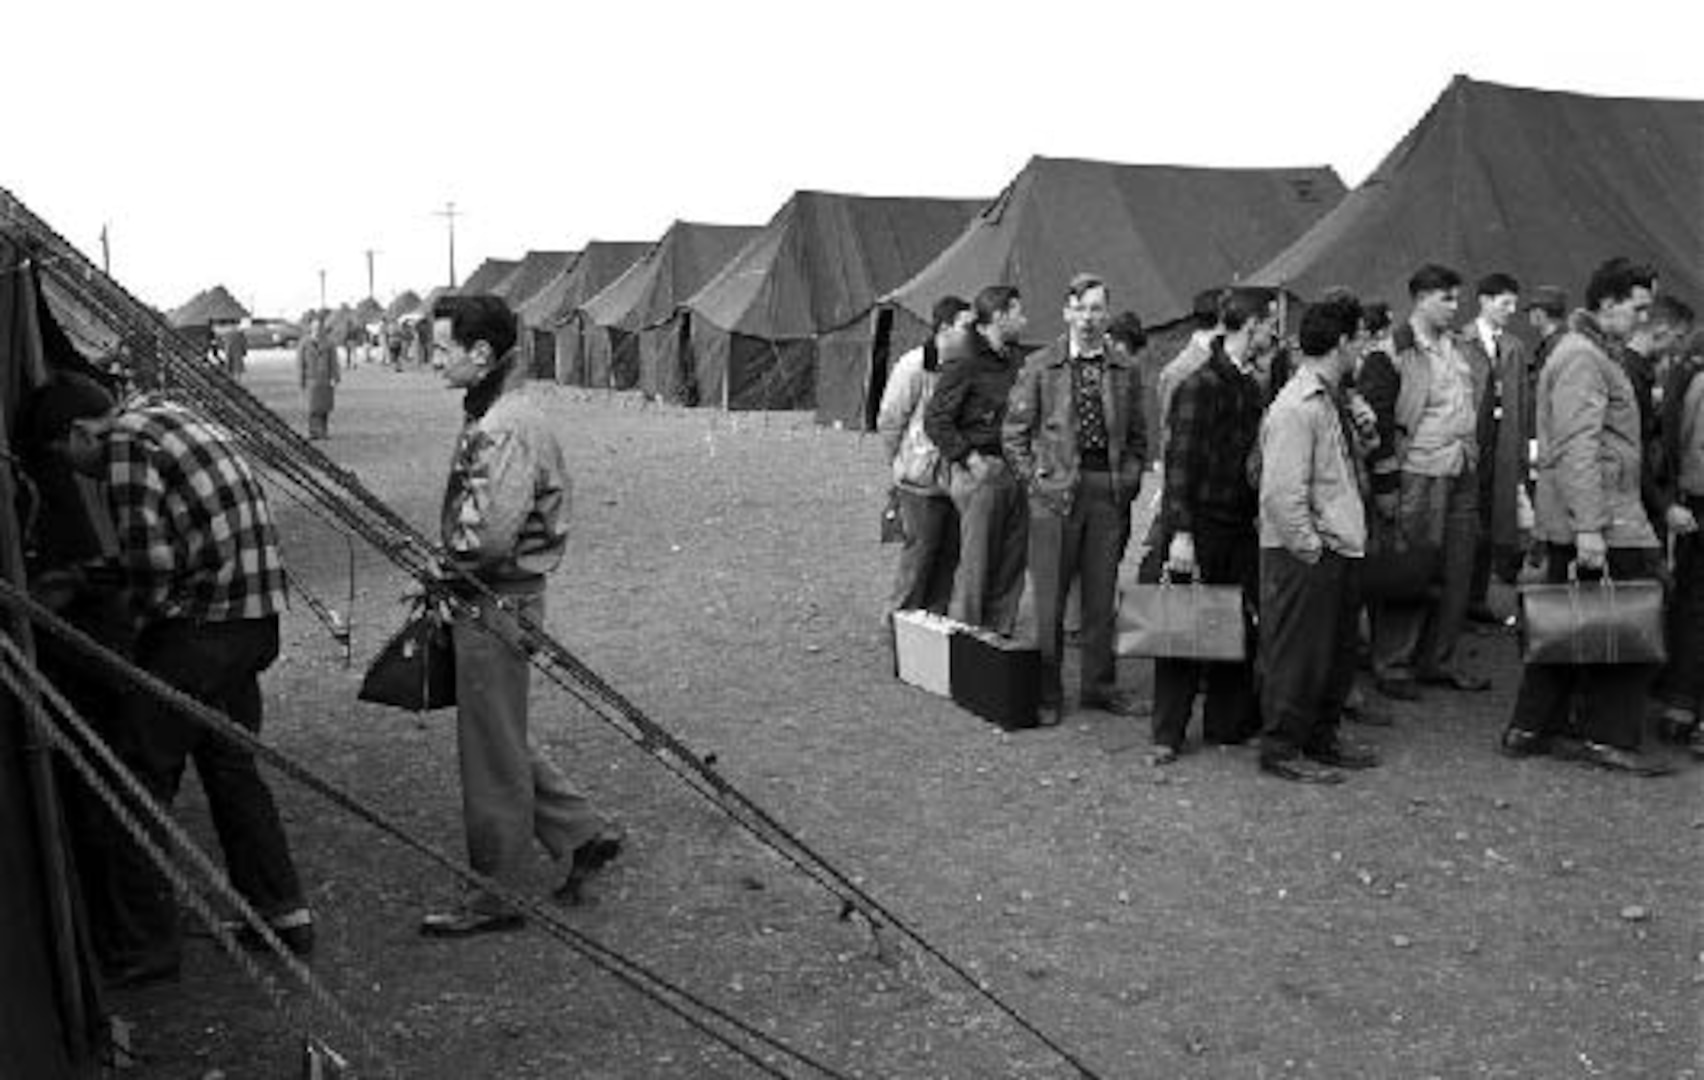 .Expansion for the Korean War placed great strains on the single point of entry for BMT, Lackland AFB.  To cope with its population explosion of over 75,000 new trainees and instructors, tent cities emerged—a long Air Force tradition.